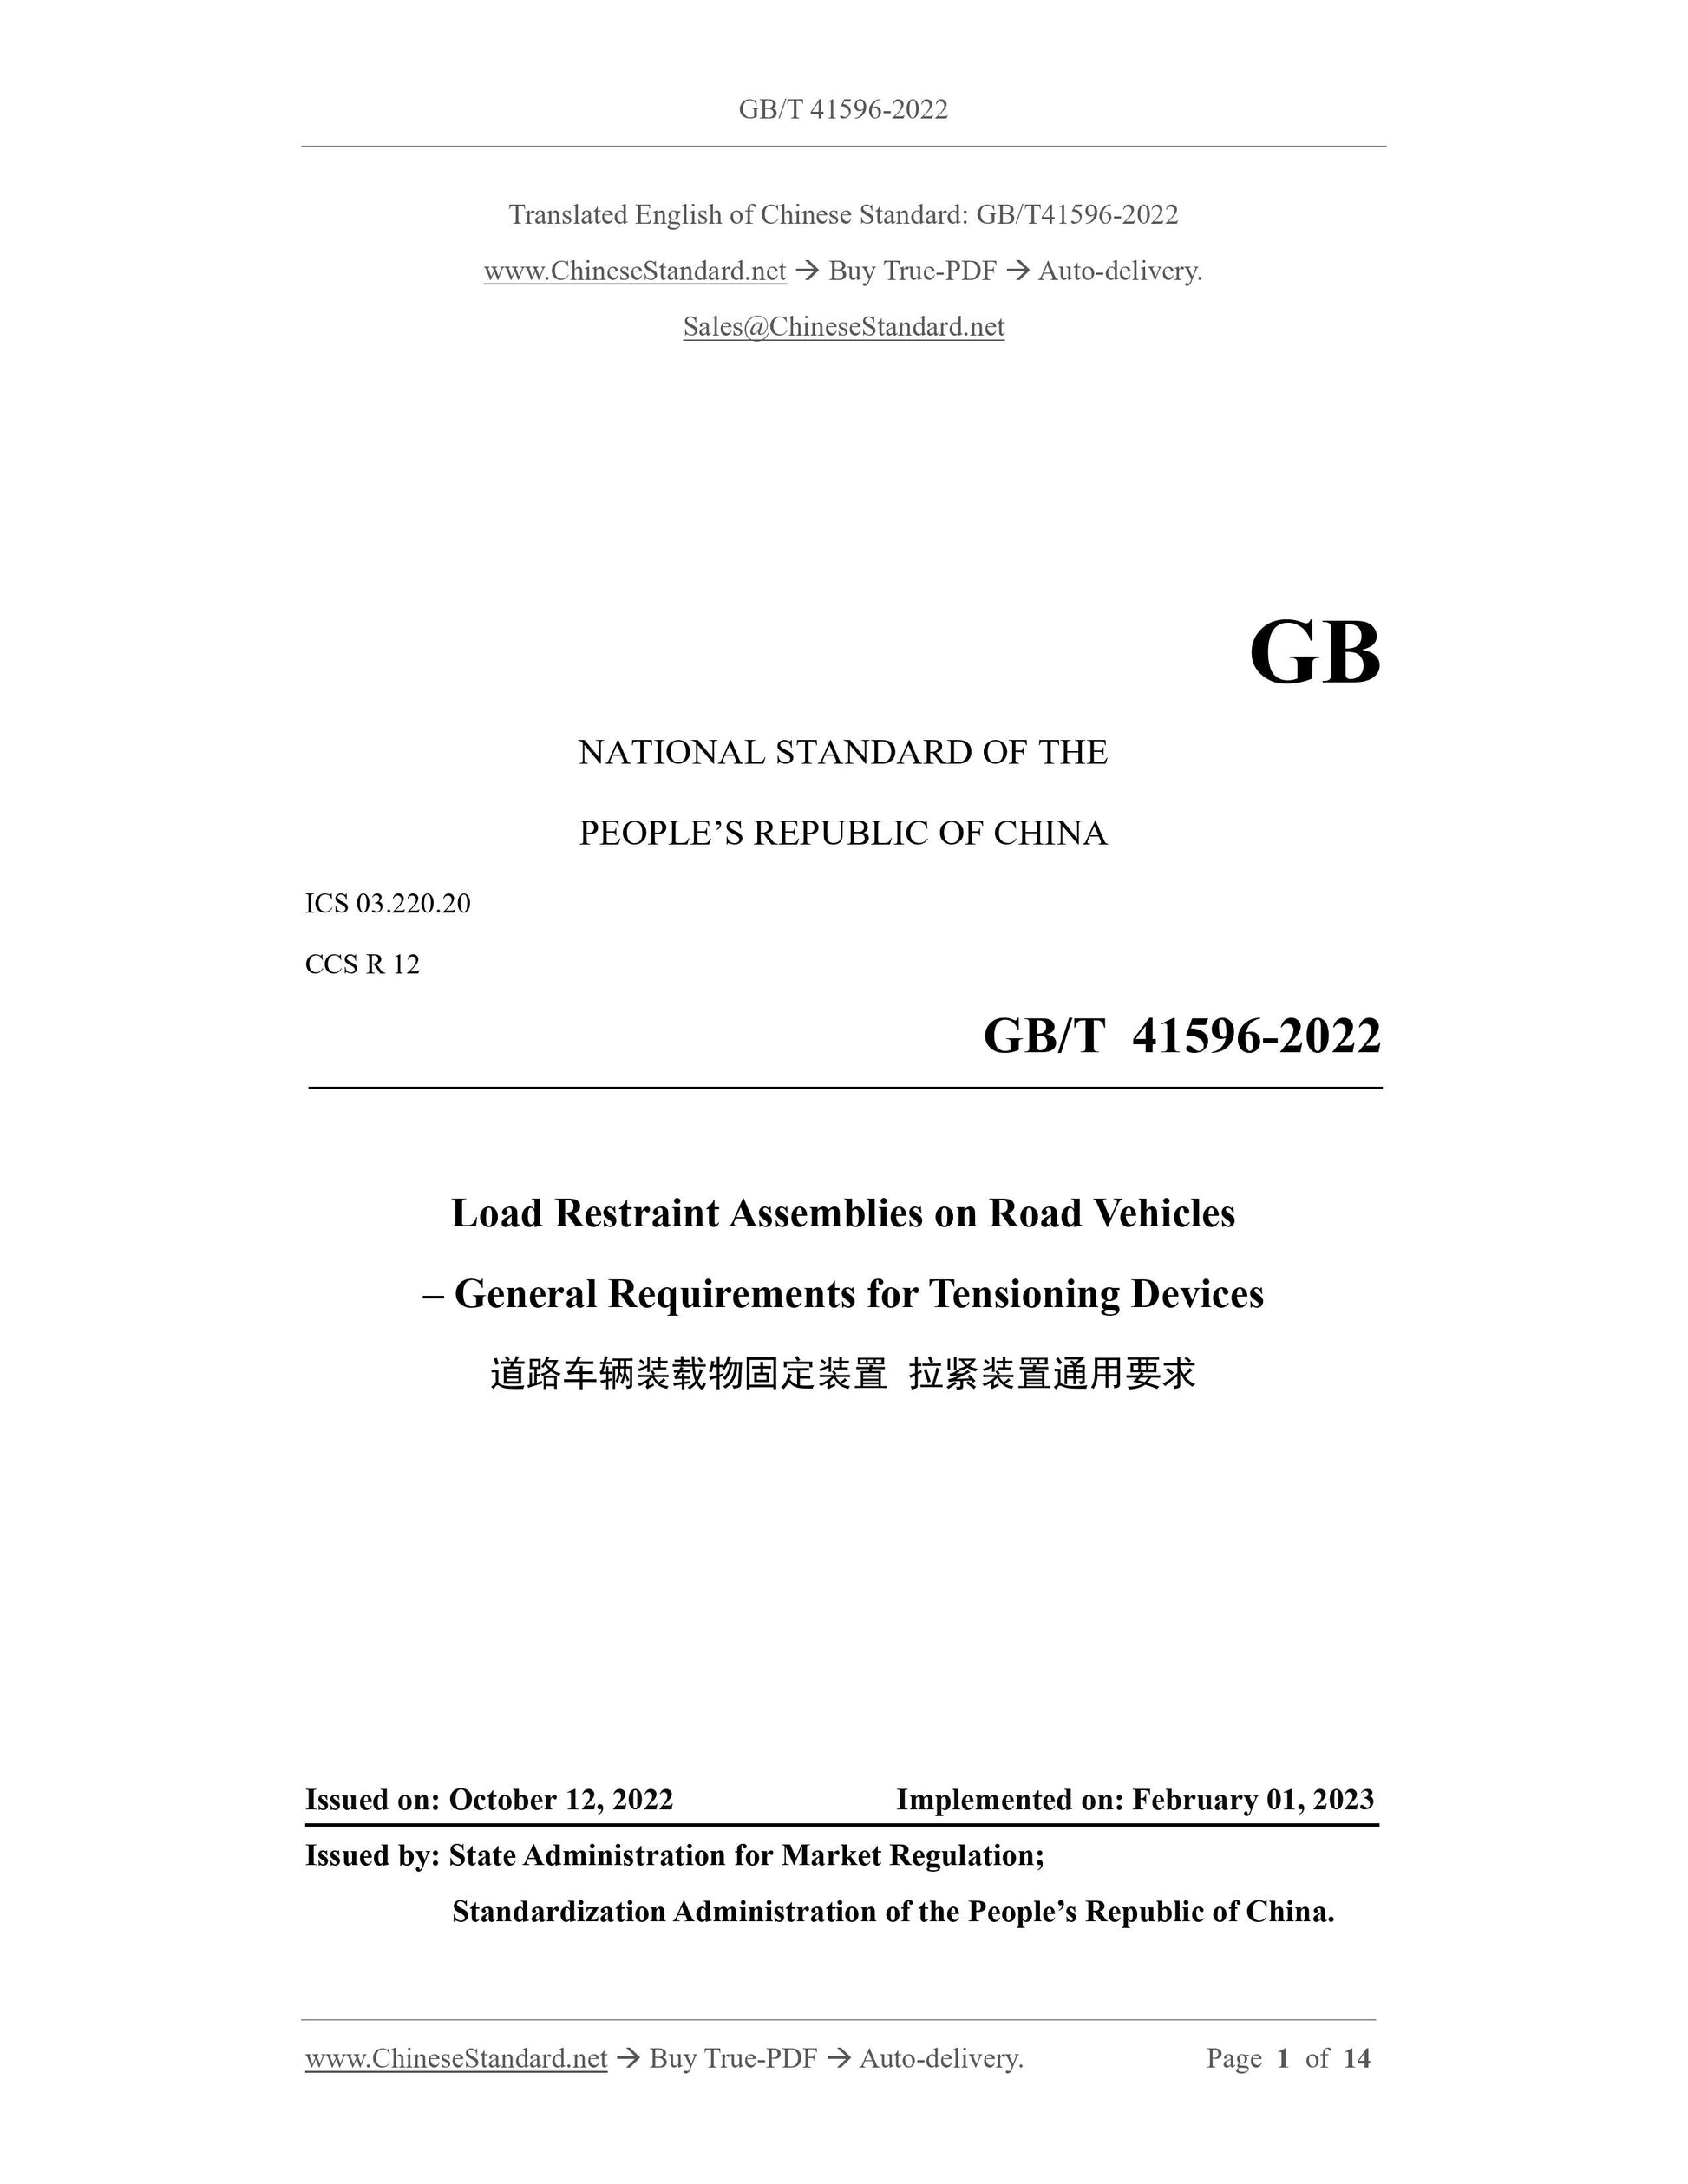 GB/T 41596-2022 Page 1